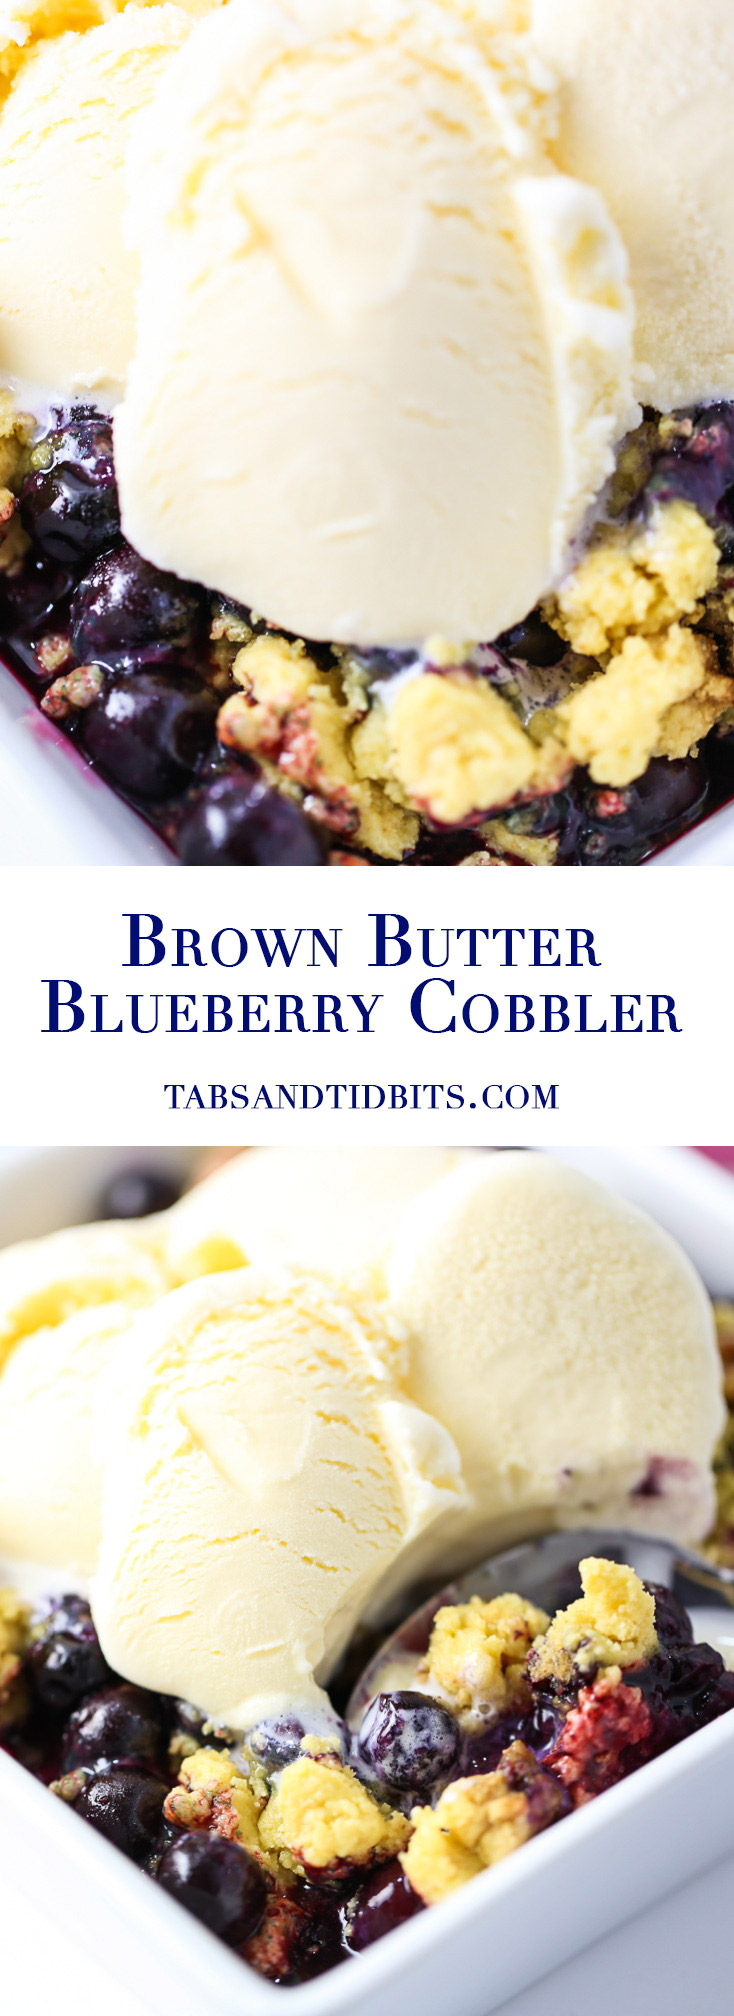 Brown Butter Blueberry Cobbler - A 4-ingredient blueberry cobbler with a rich brown butter streusel topping!